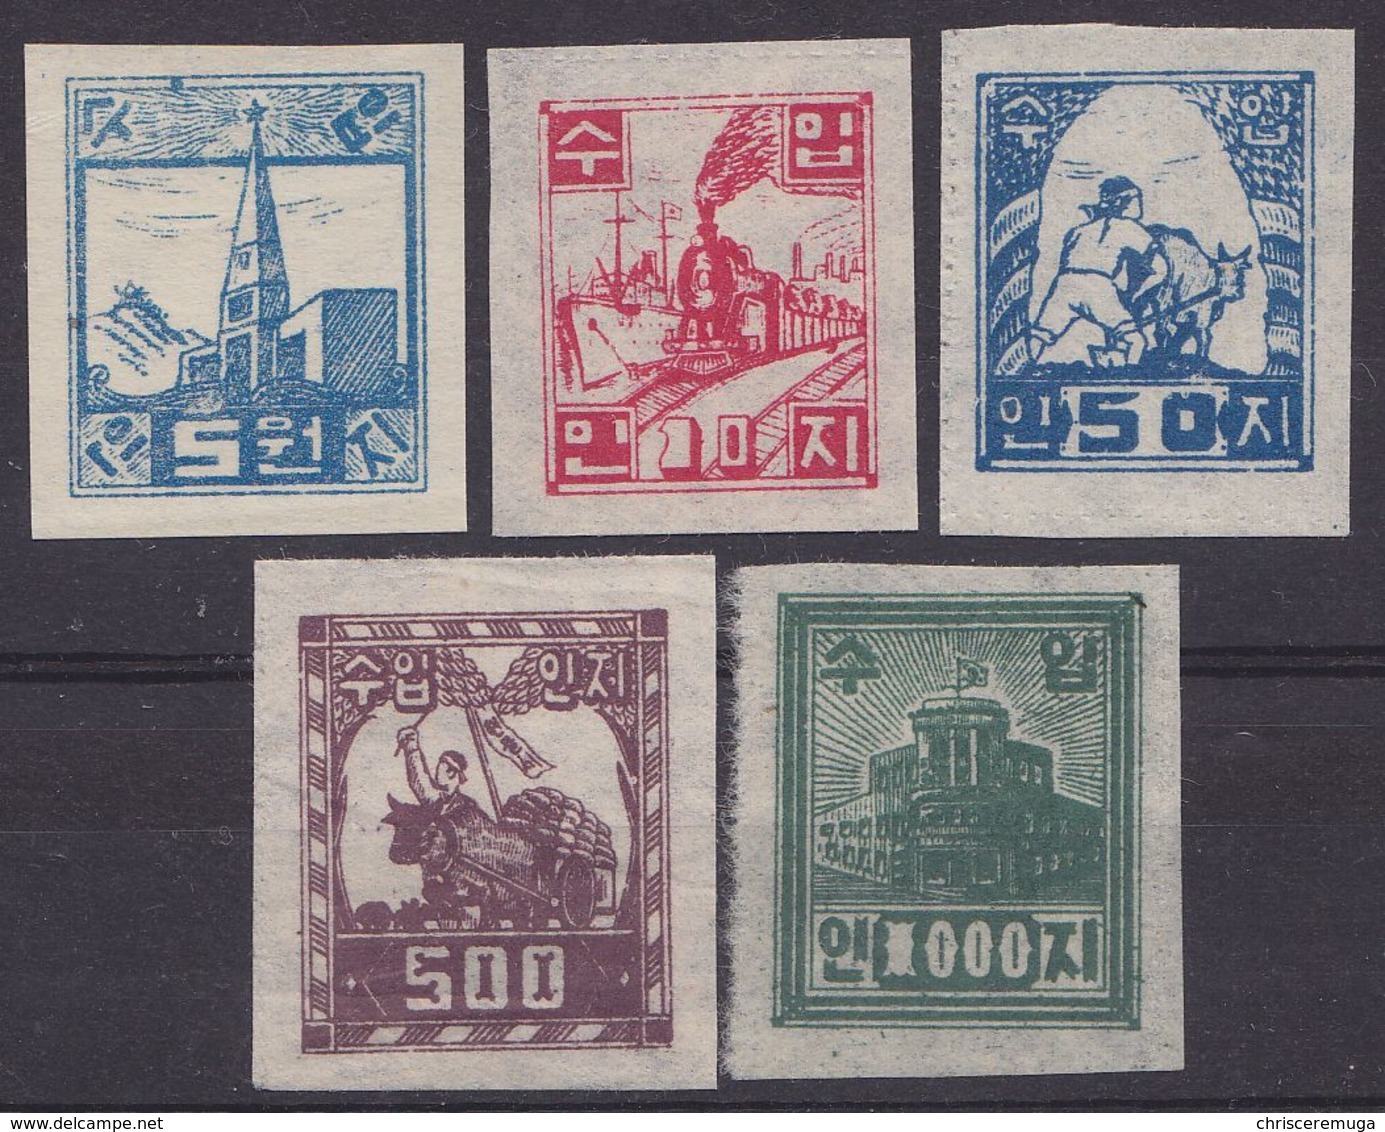 NORTH KOREA RUSSIA 1950 Early Revenues 5w To 1000w, Rouletted Or Imperf. Chinese Intervention Korean War - Siberia And Far East